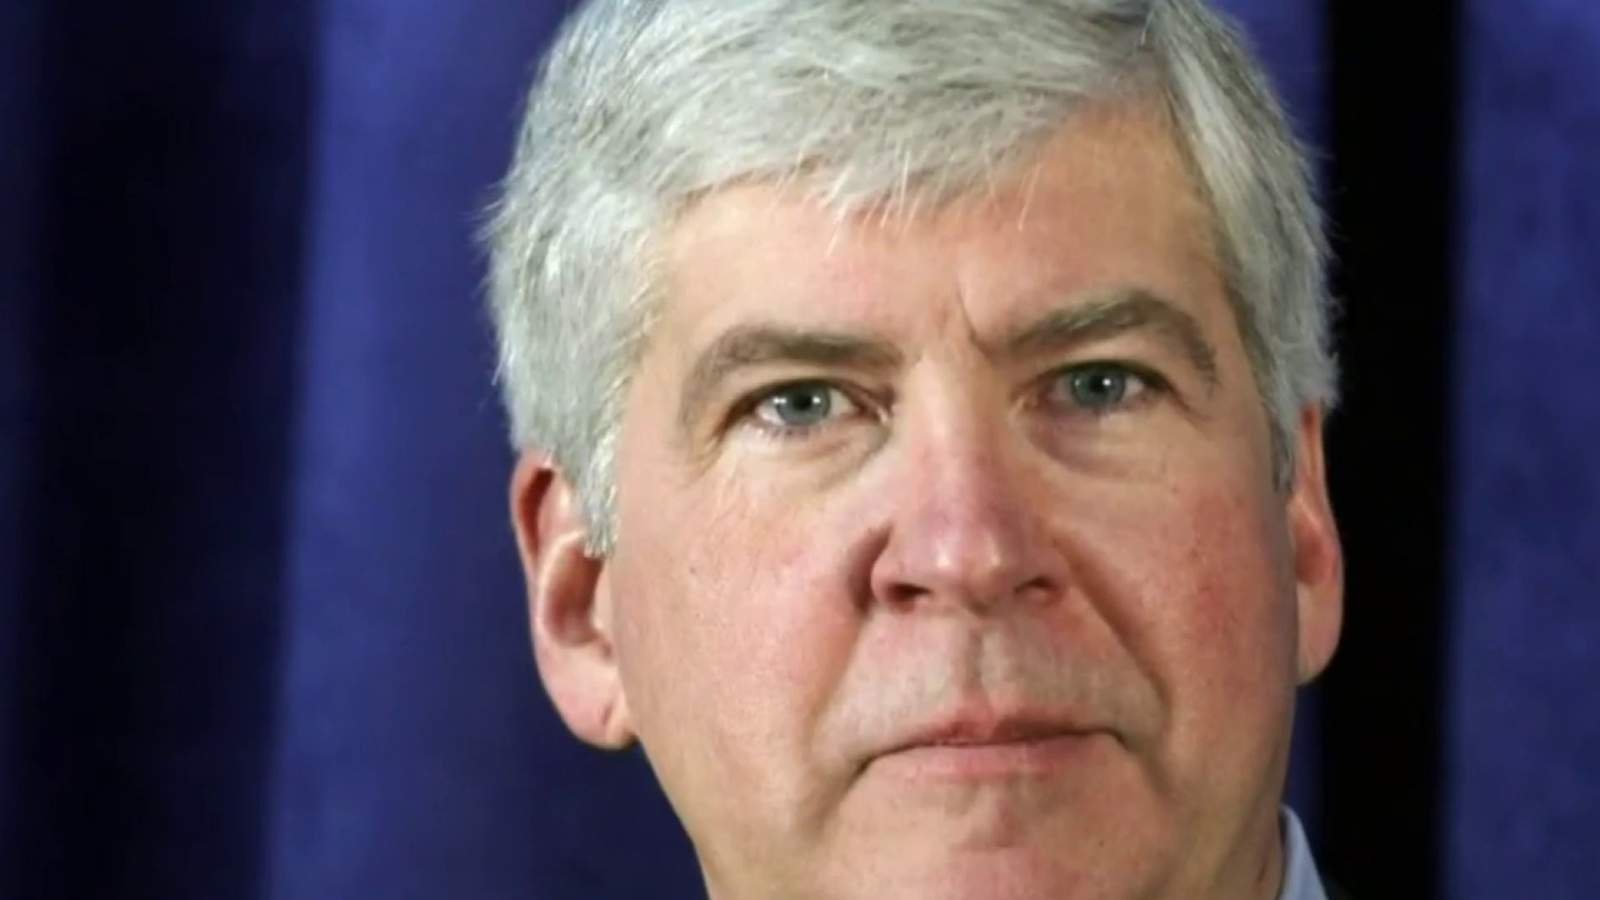 Lawyers for former Gov. Snyder argue Flint water crisis charges filed in wrong county, should be dismissed